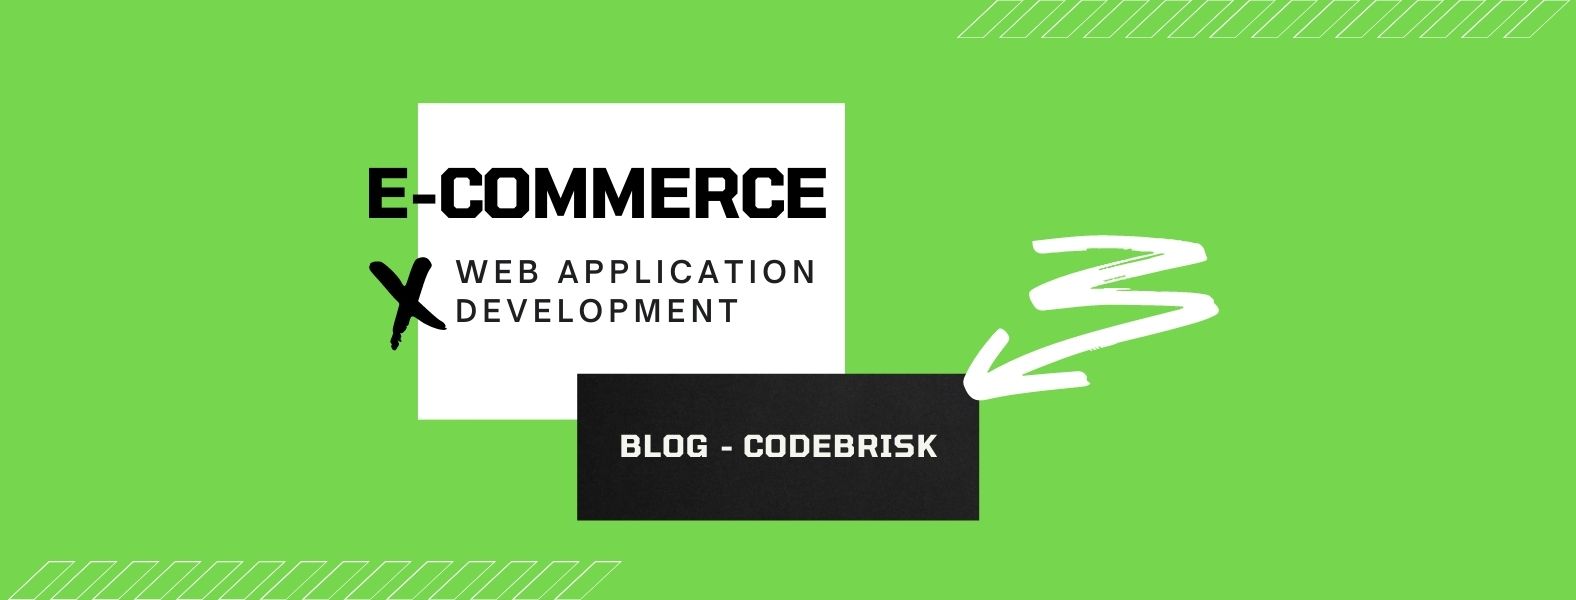 Why Should You Develop an E-commerce Web Application cover image